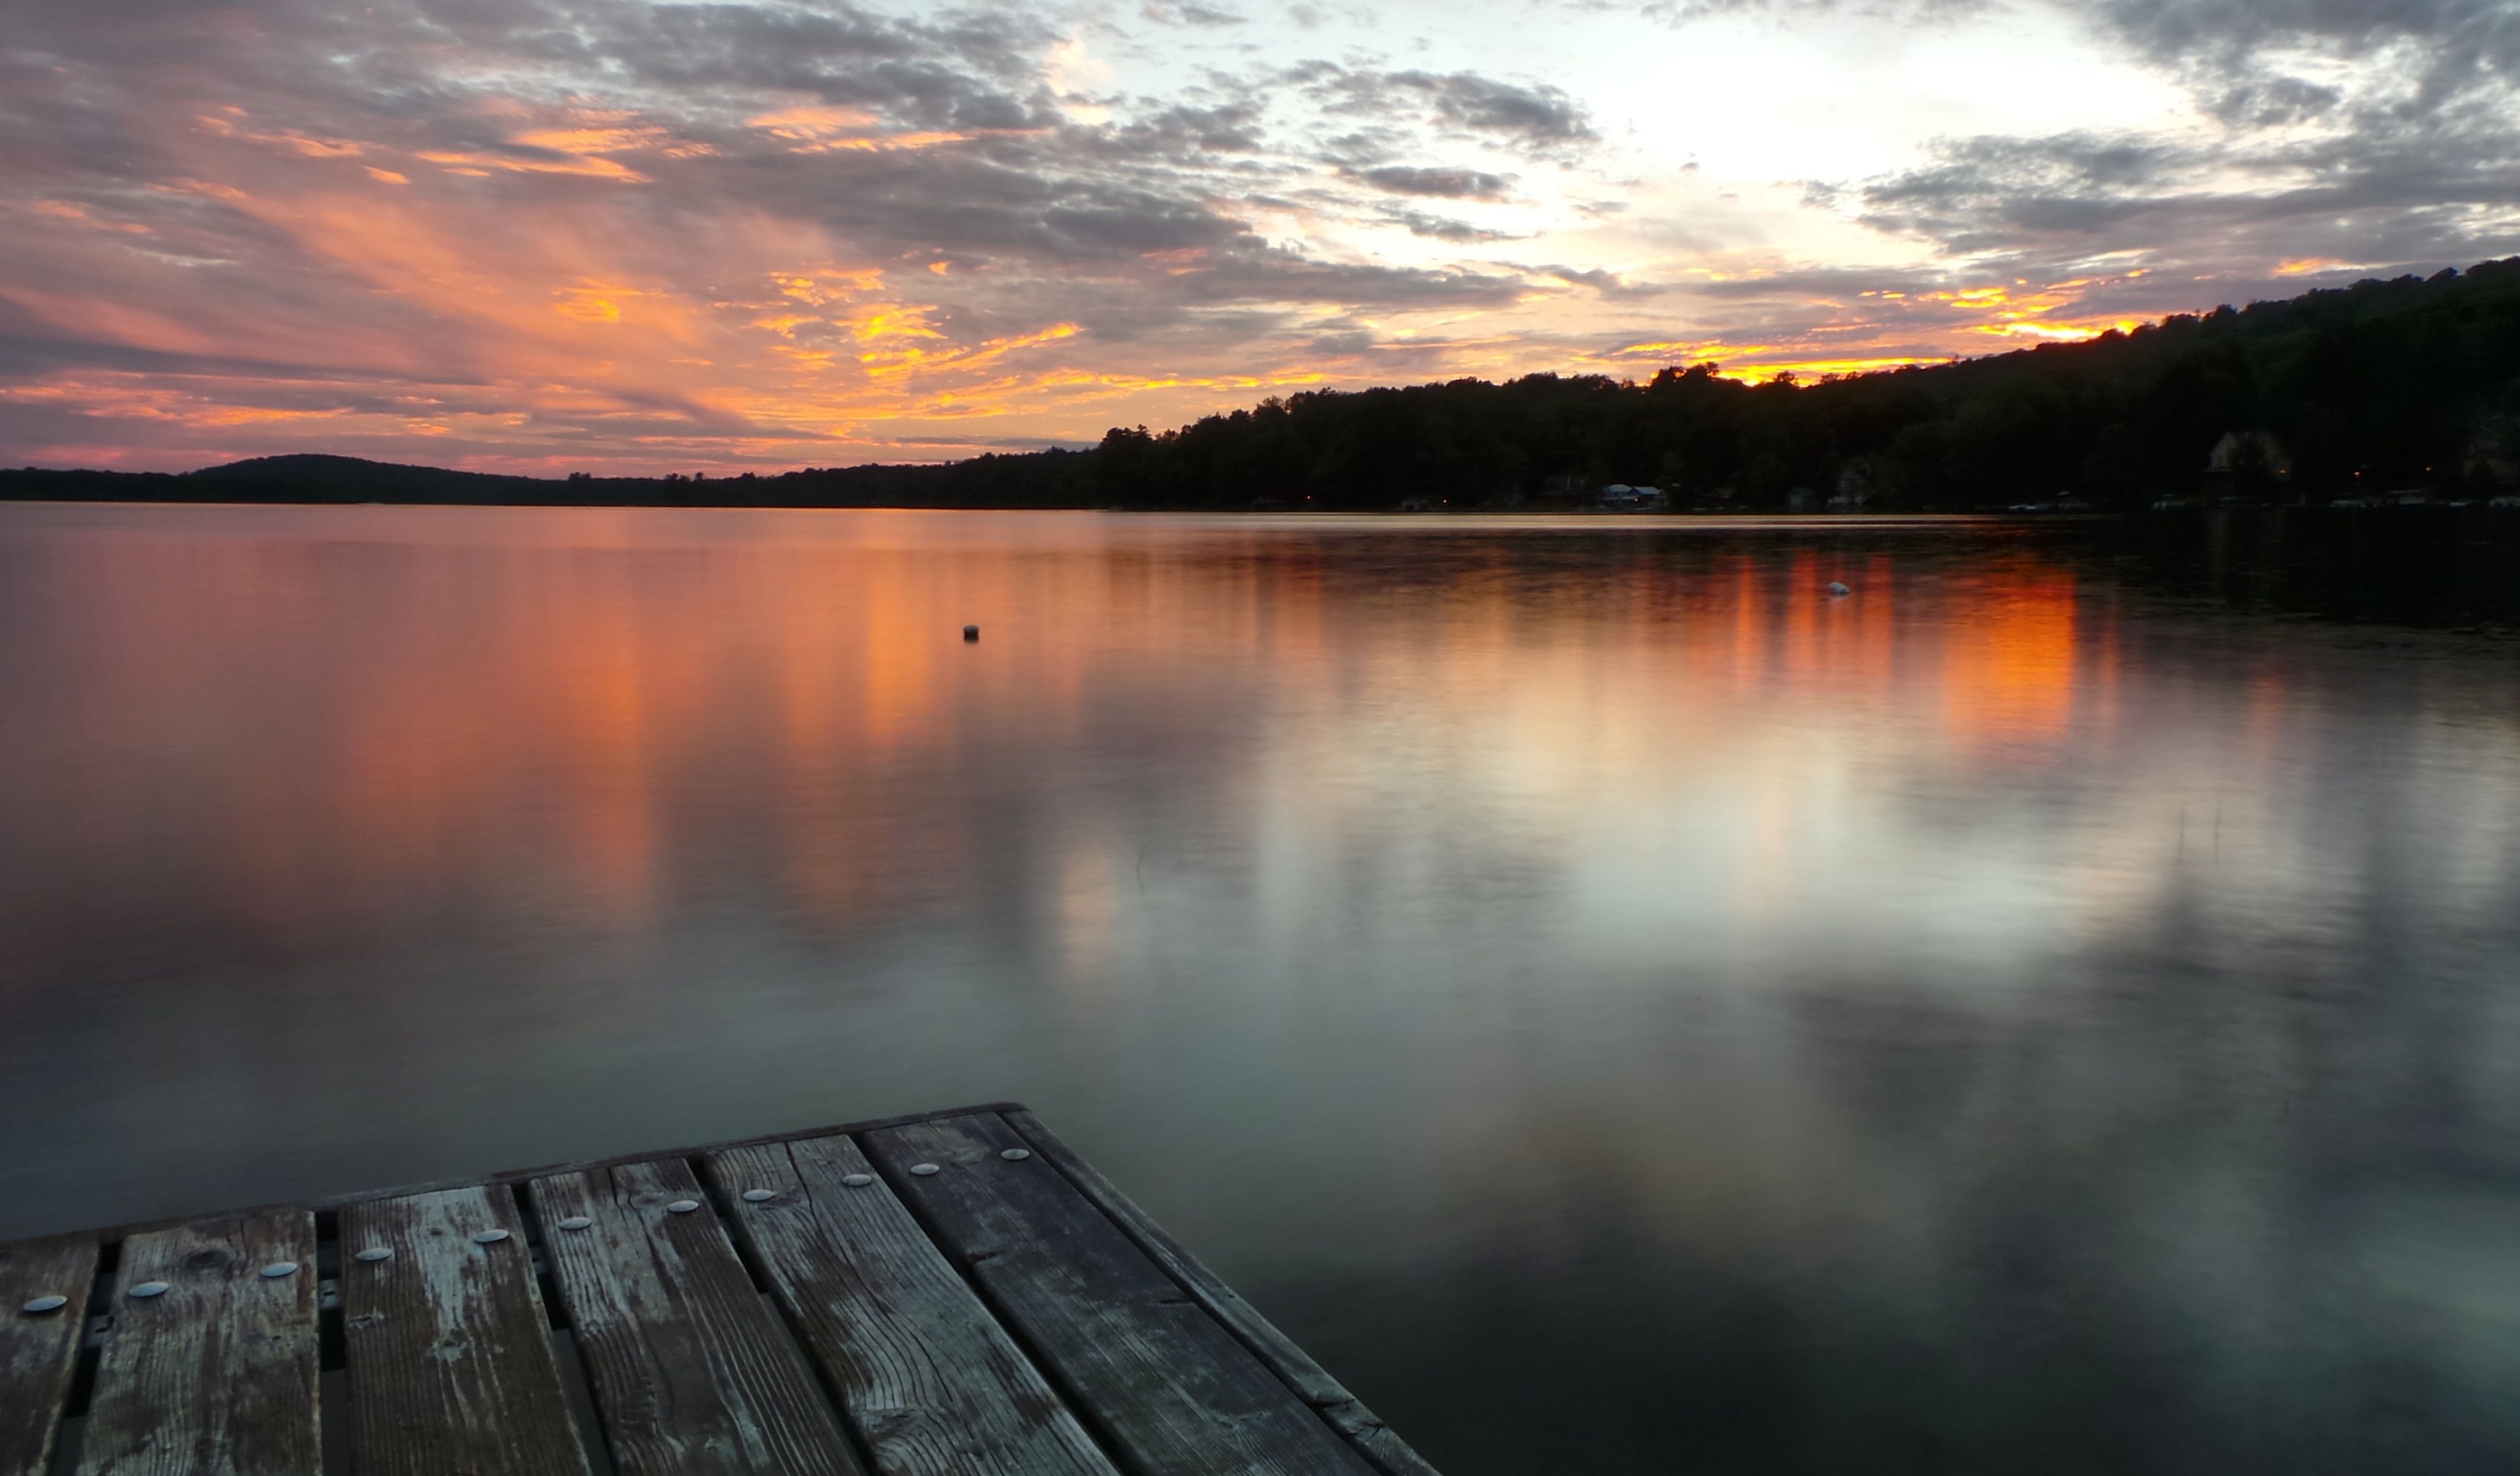 Colorful Sunset Lake View Picture. Download Free Image